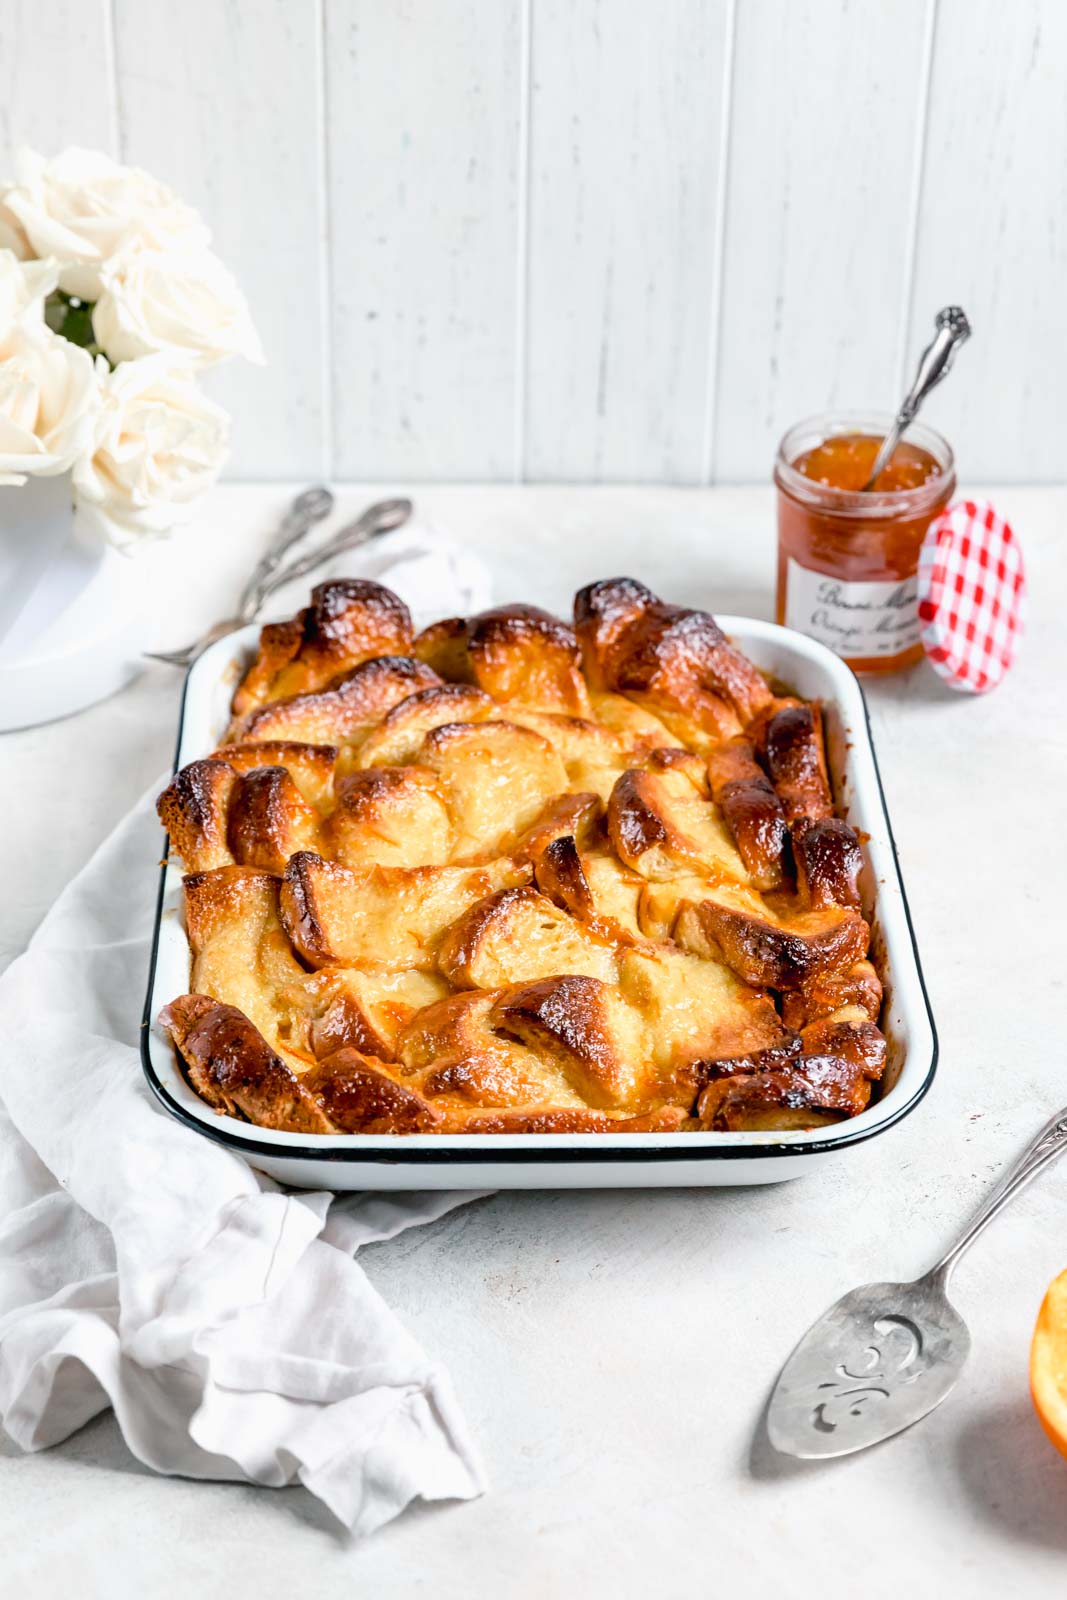 This buttery and bright Orange Marmalade French Toast Bake is perfect for Sunday brunch. It comes together in a pinch and will have everyone coming back for seconds...or thirds :)